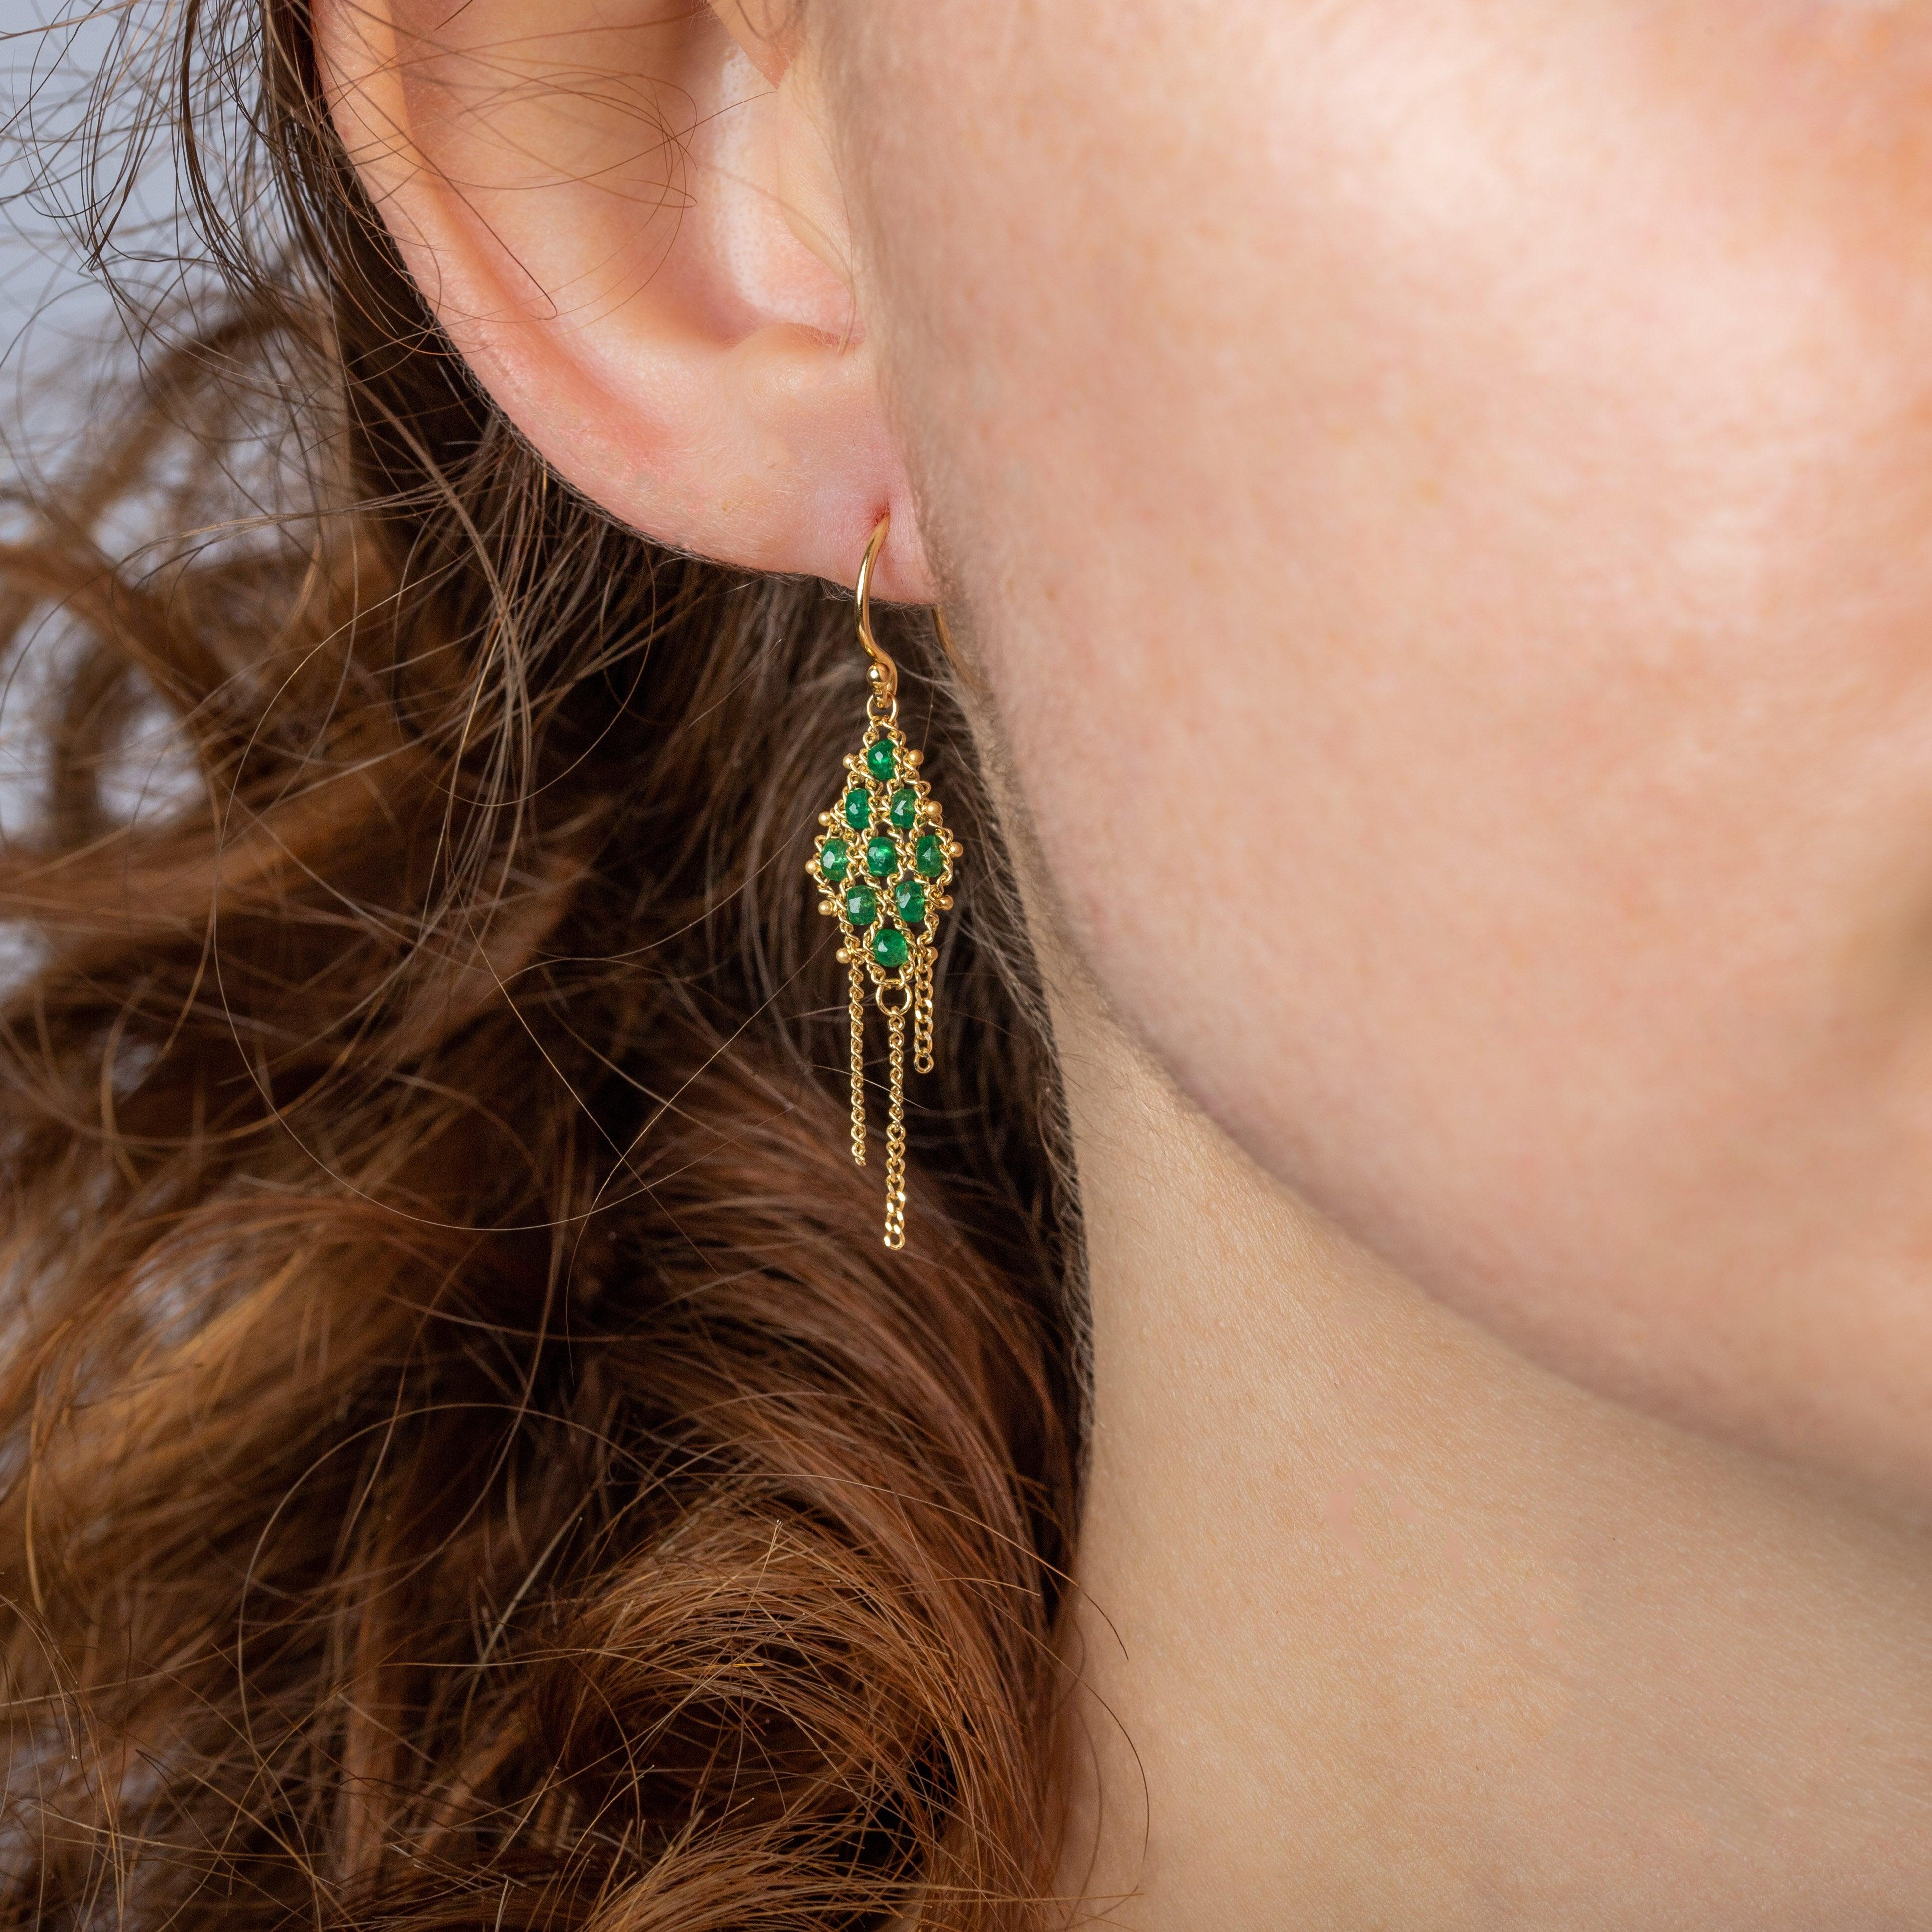 A delicate lattice of hand-woven 18K yellow gold chain suspends a verdant, kite-shaped arrangement of lush green Emeralds in this unforgettable pair of earrings. Further gold chains drip from the base of the kite, forming a tiny trio of sunshine